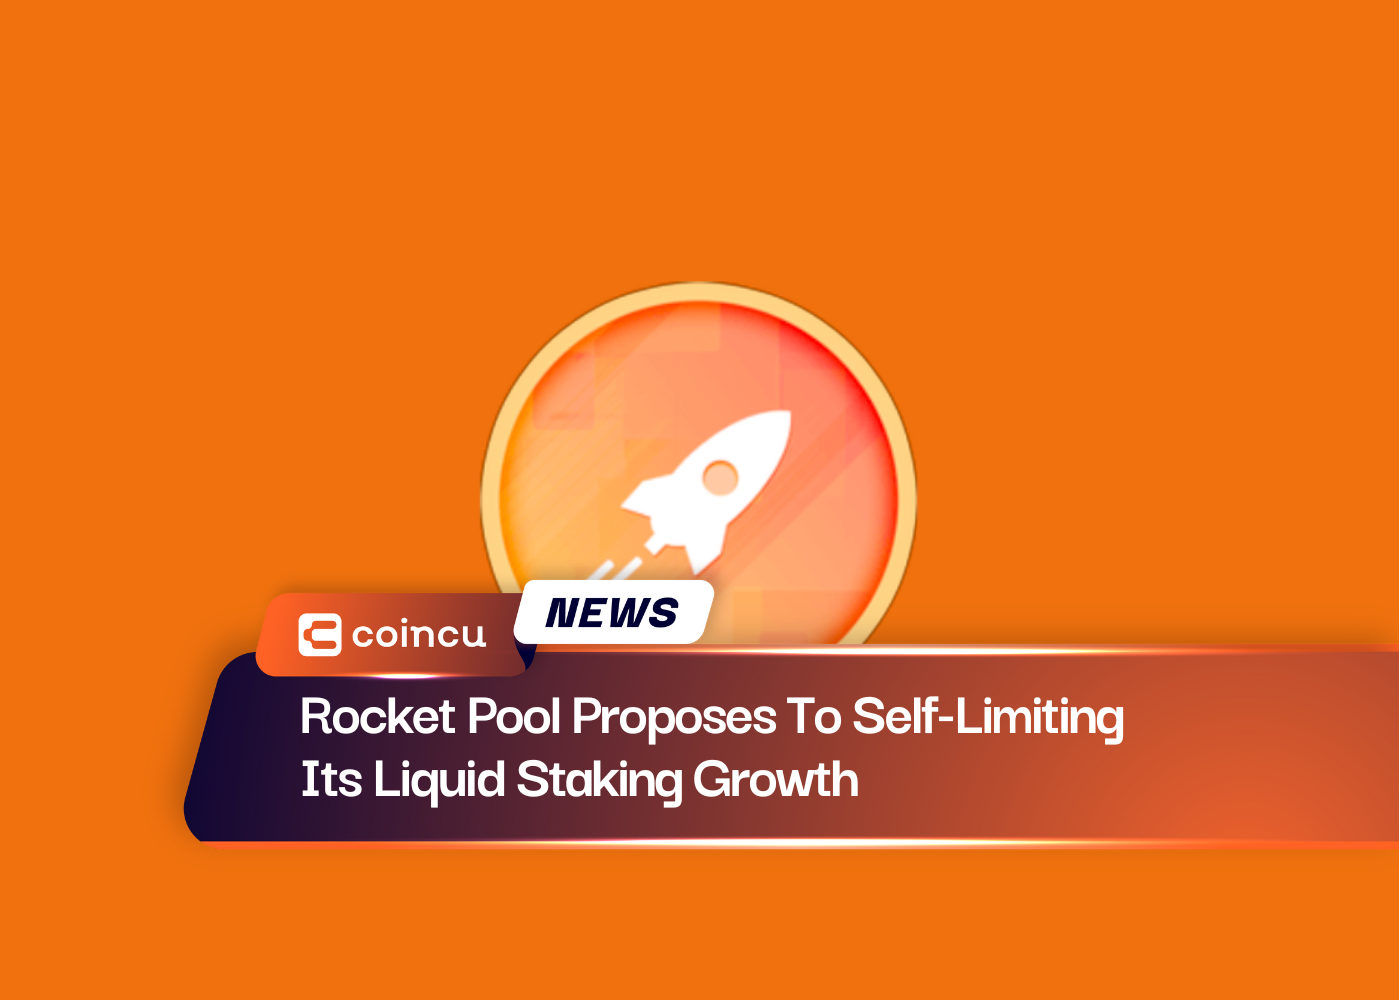 Rocket Pool Proposes To Self-Limiting Its Liquid Staking Growth